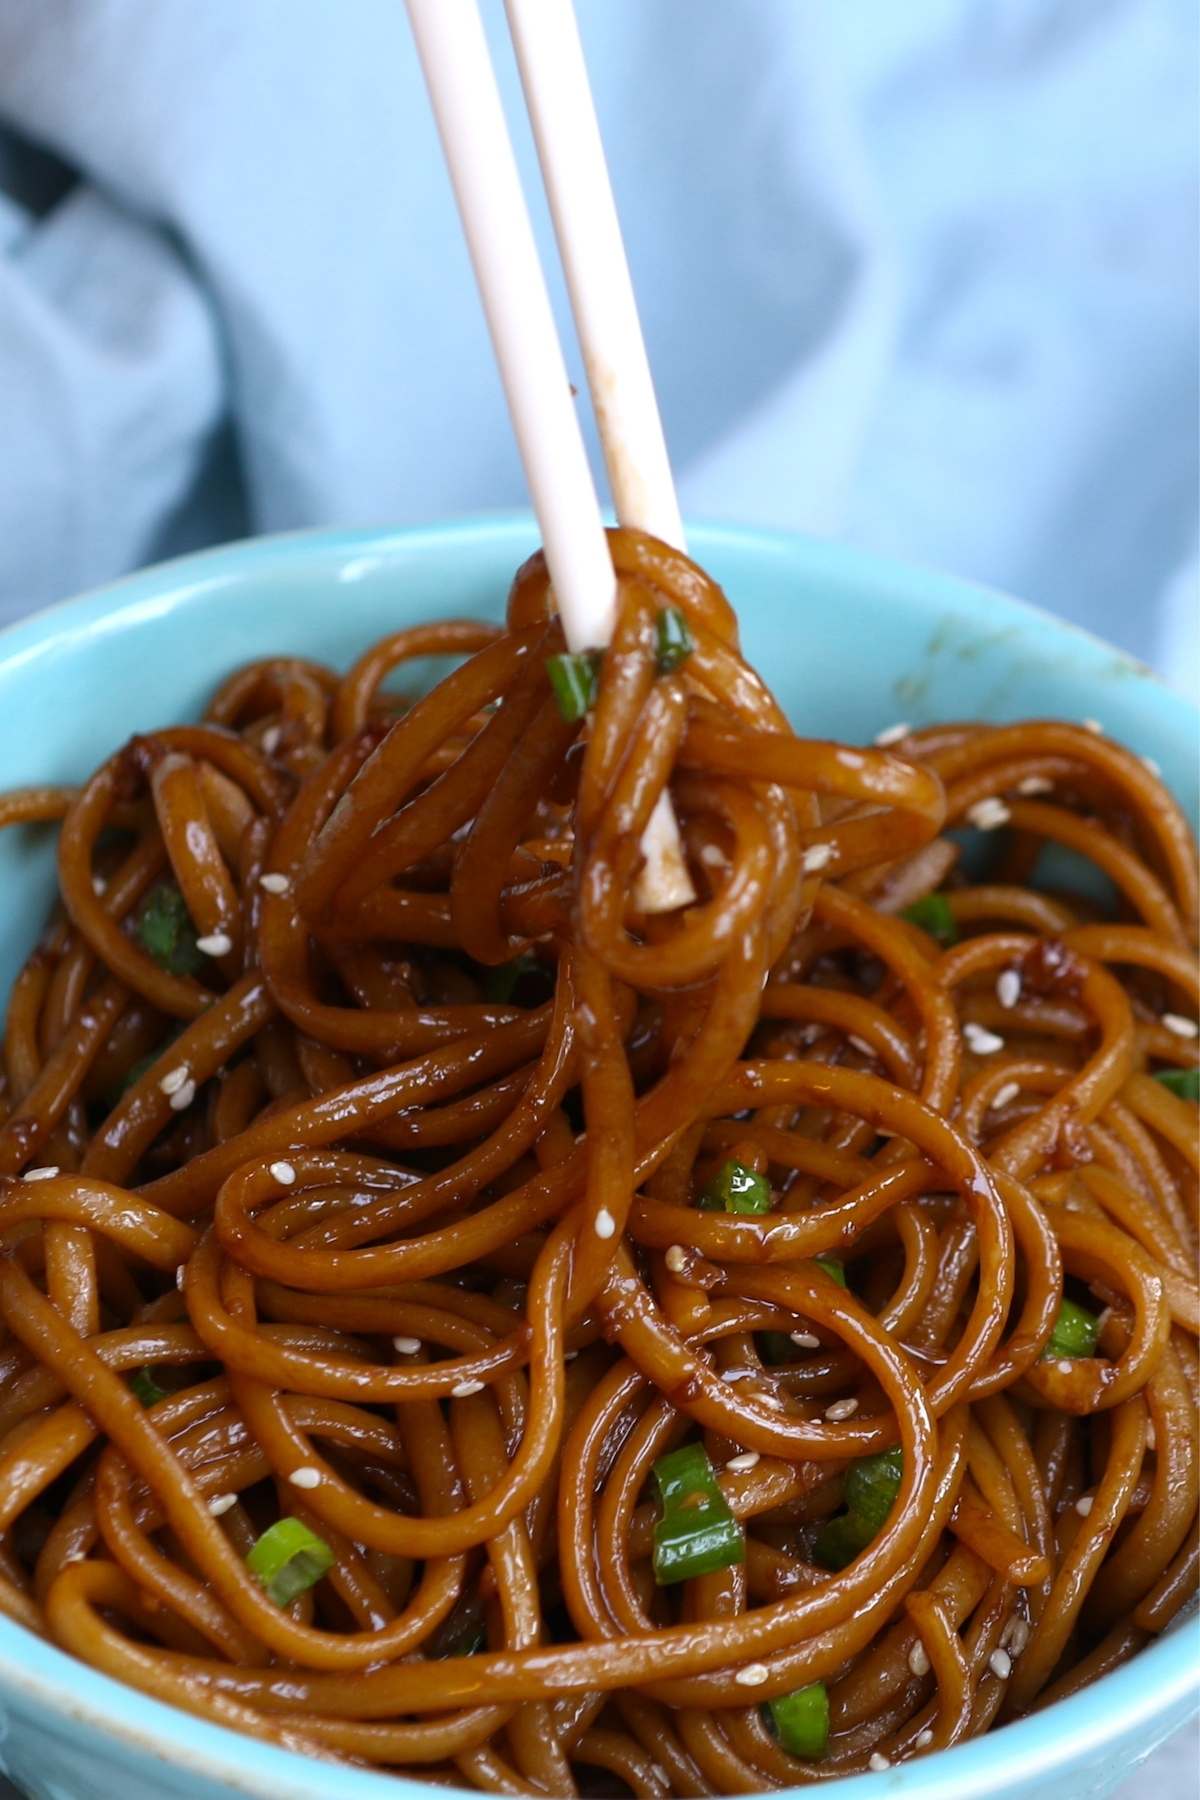 A trip to a hibachi is always a good time. No matter your entree, you can never go wrong with a generous serving of delicious hibachi noodles. This Japanese-inspired dish is made with yakisoba noodles, Teriyaki sauce, brown sugar and sesame oil. Enjoy with shrimp, chicken, steak or plant-based options.